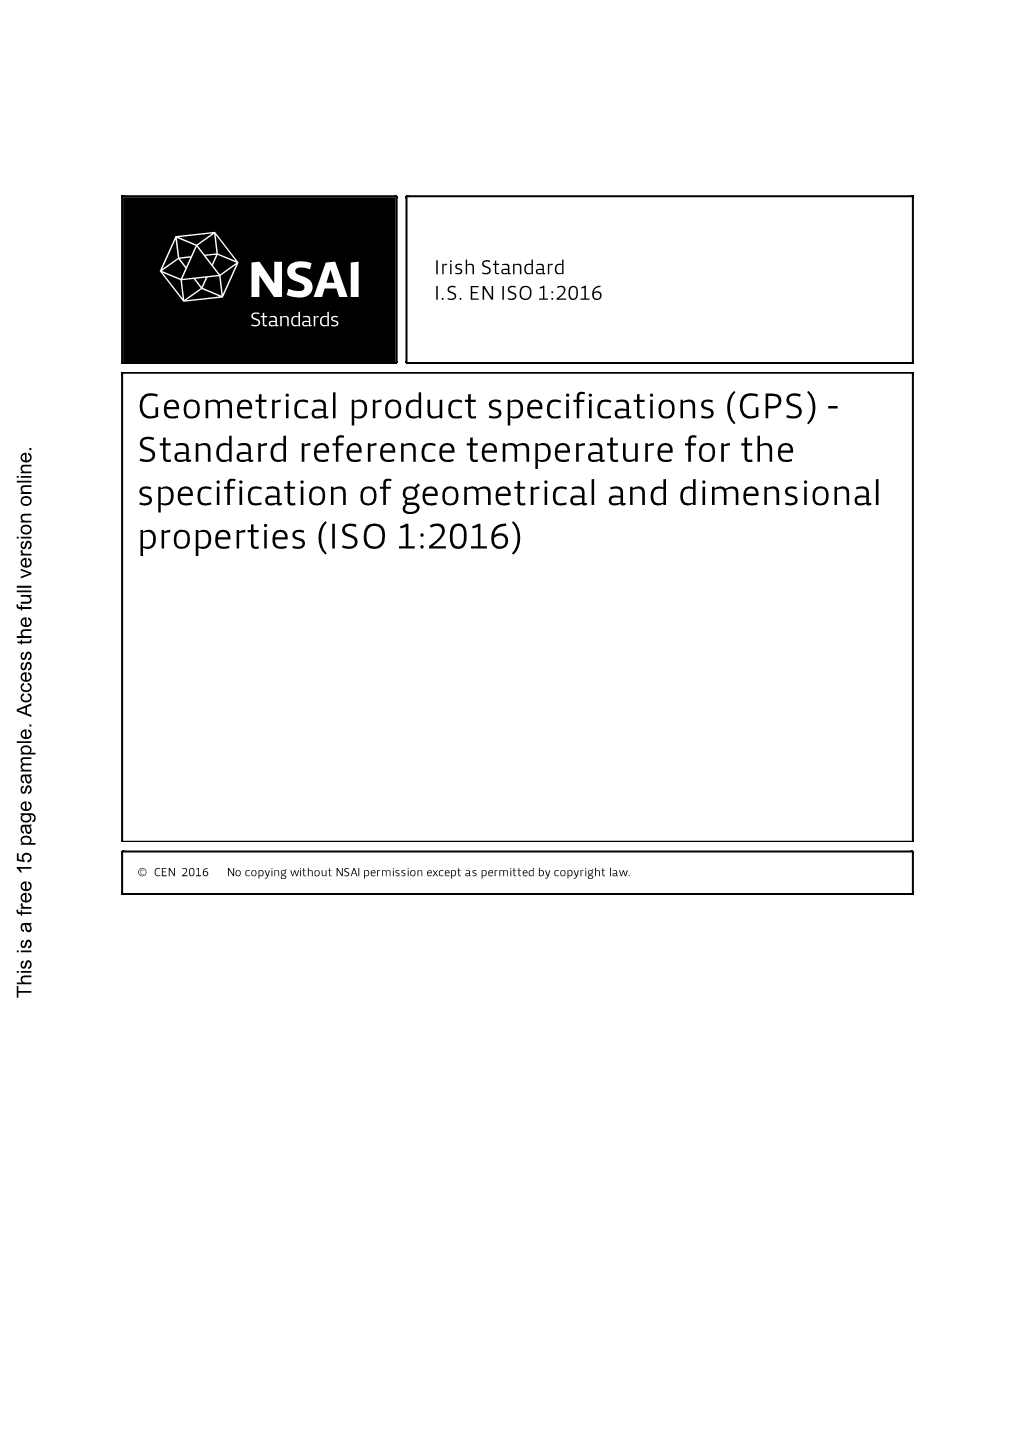 Standard Reference Temperature for the Specification of Geometrical and Dimensional Properties (ISO 1:2016)